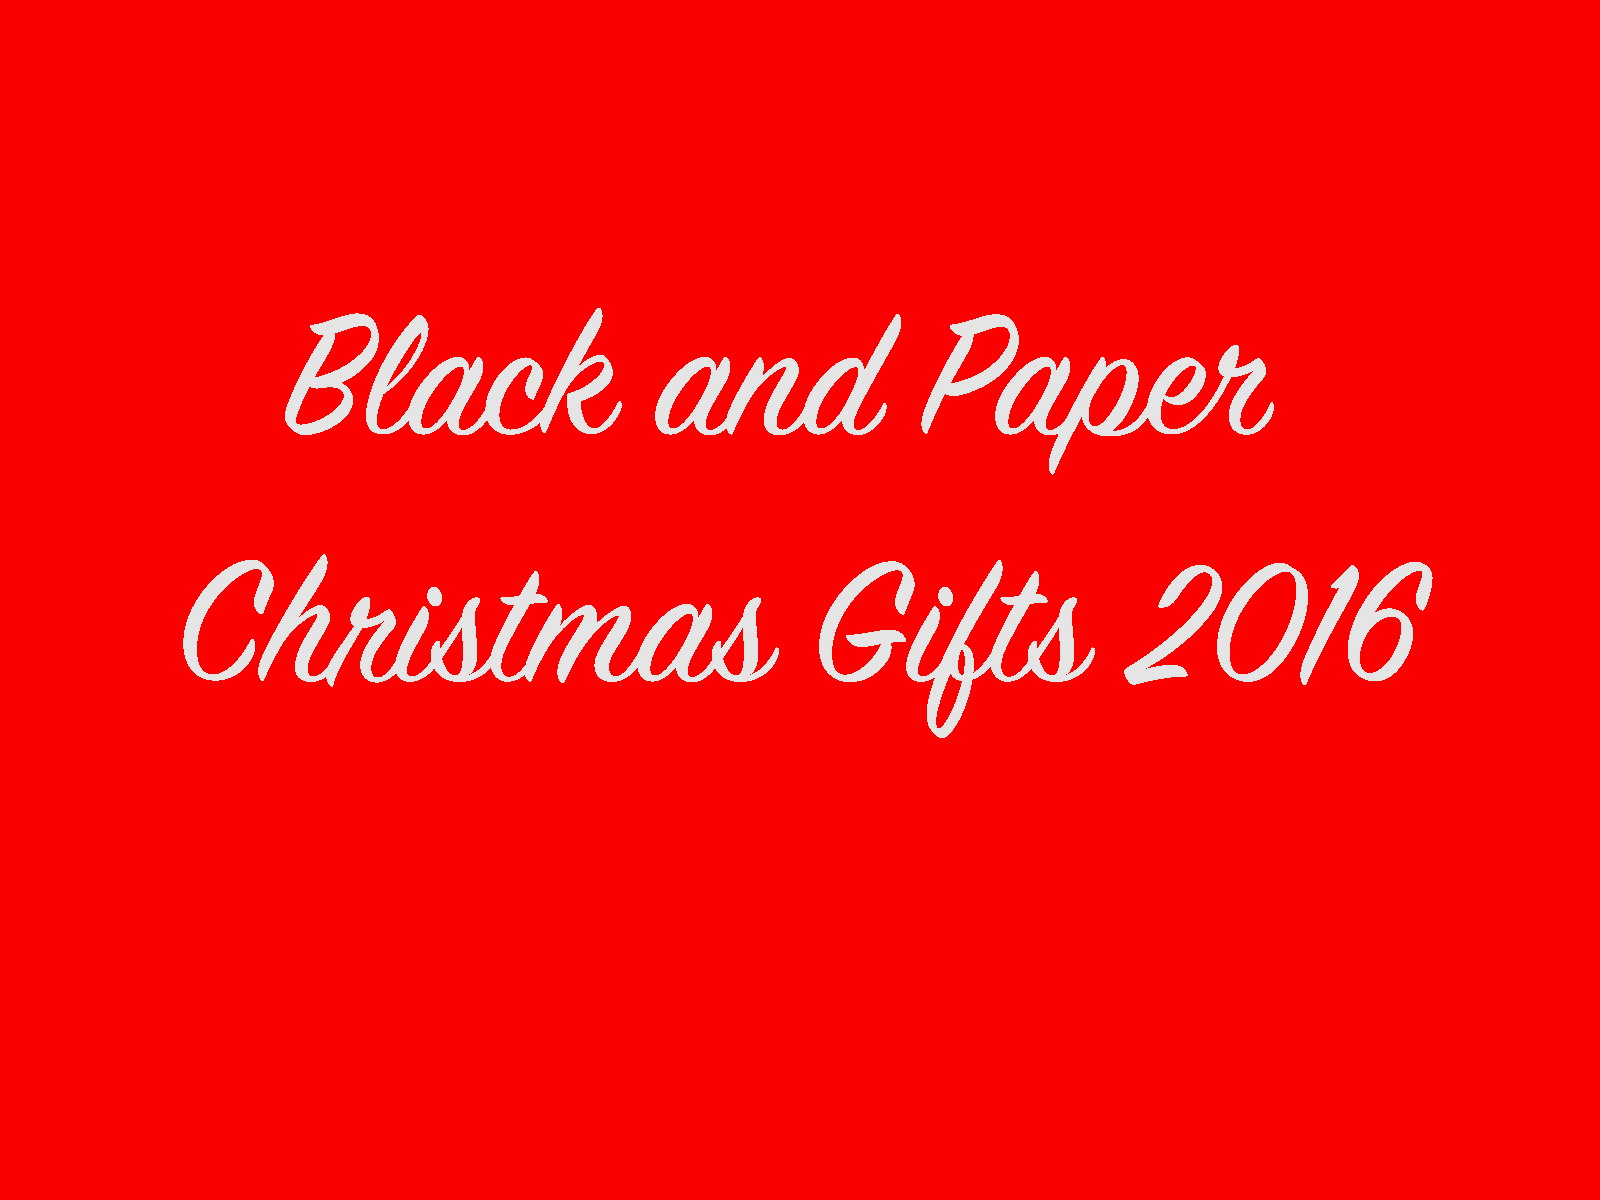 Black and Paper Christmas List 2016 AfterShockz